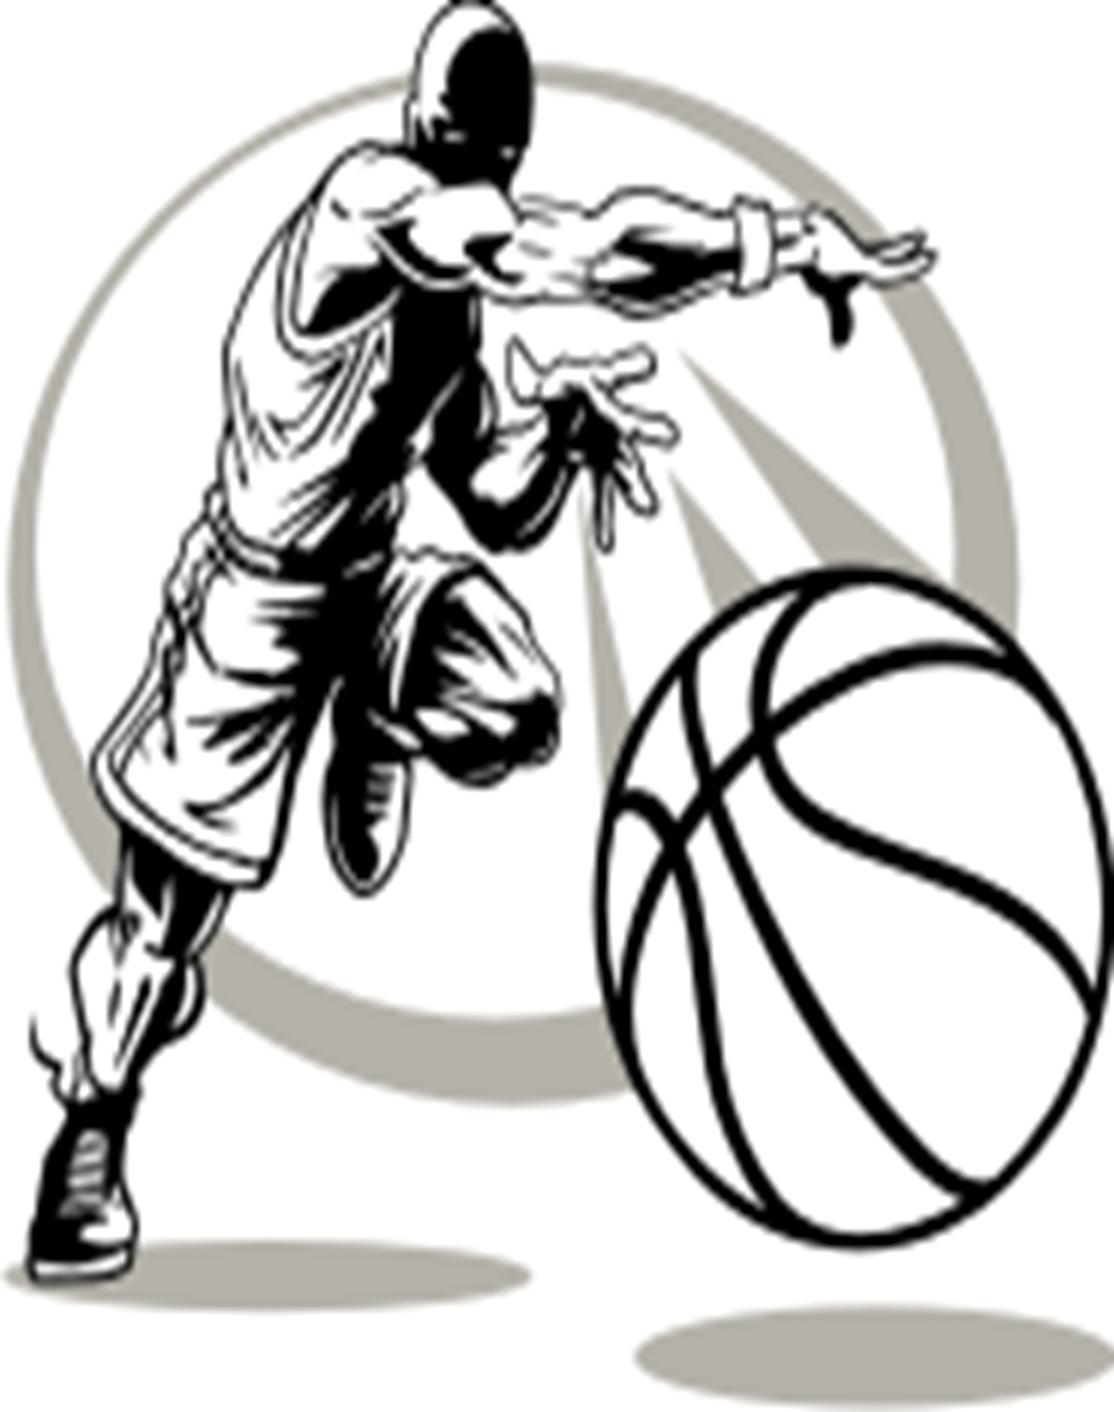 Free basketball clipart image clipart image